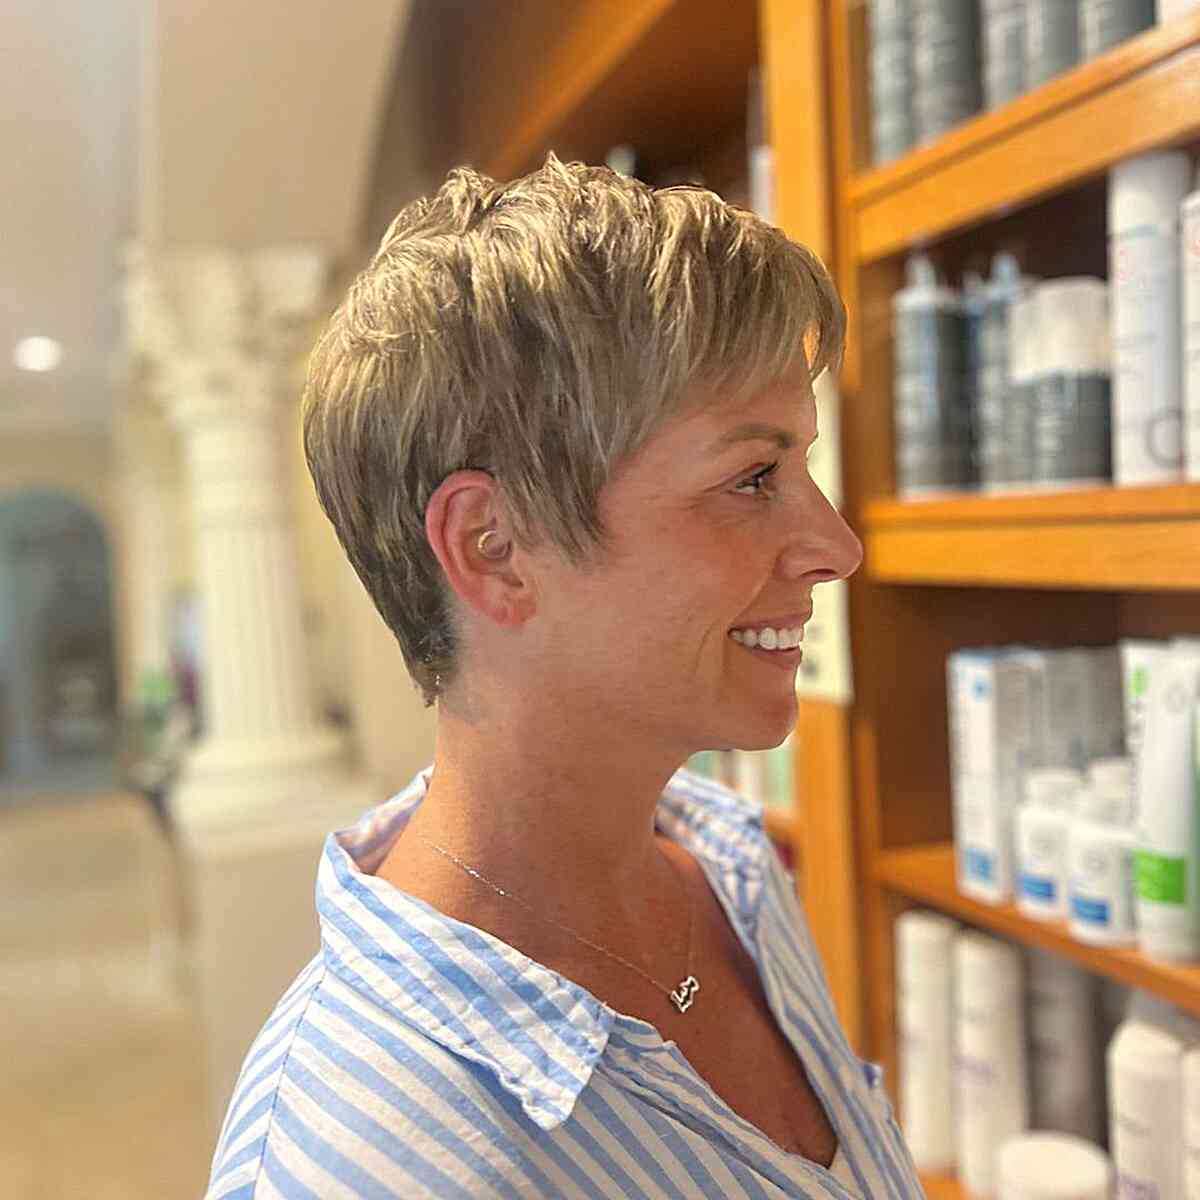 Highlighted Pixie Hair with a Side Fringe for ladies in their 50s with Fine Hair